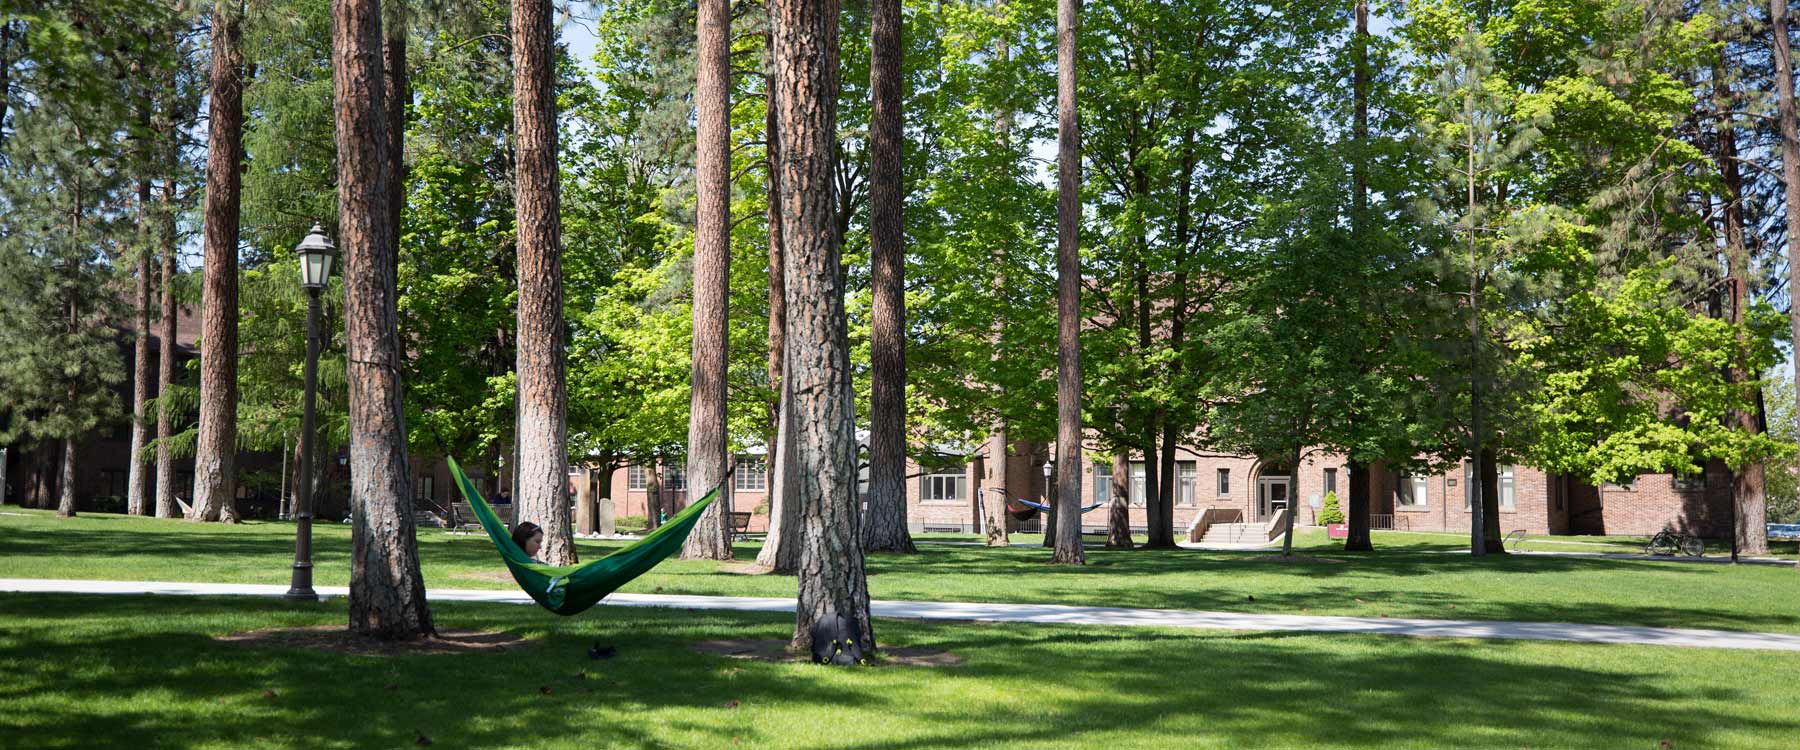 On campus, tall pine trees spread out over the grounds. Between the trees, students sit in hammocks reading.